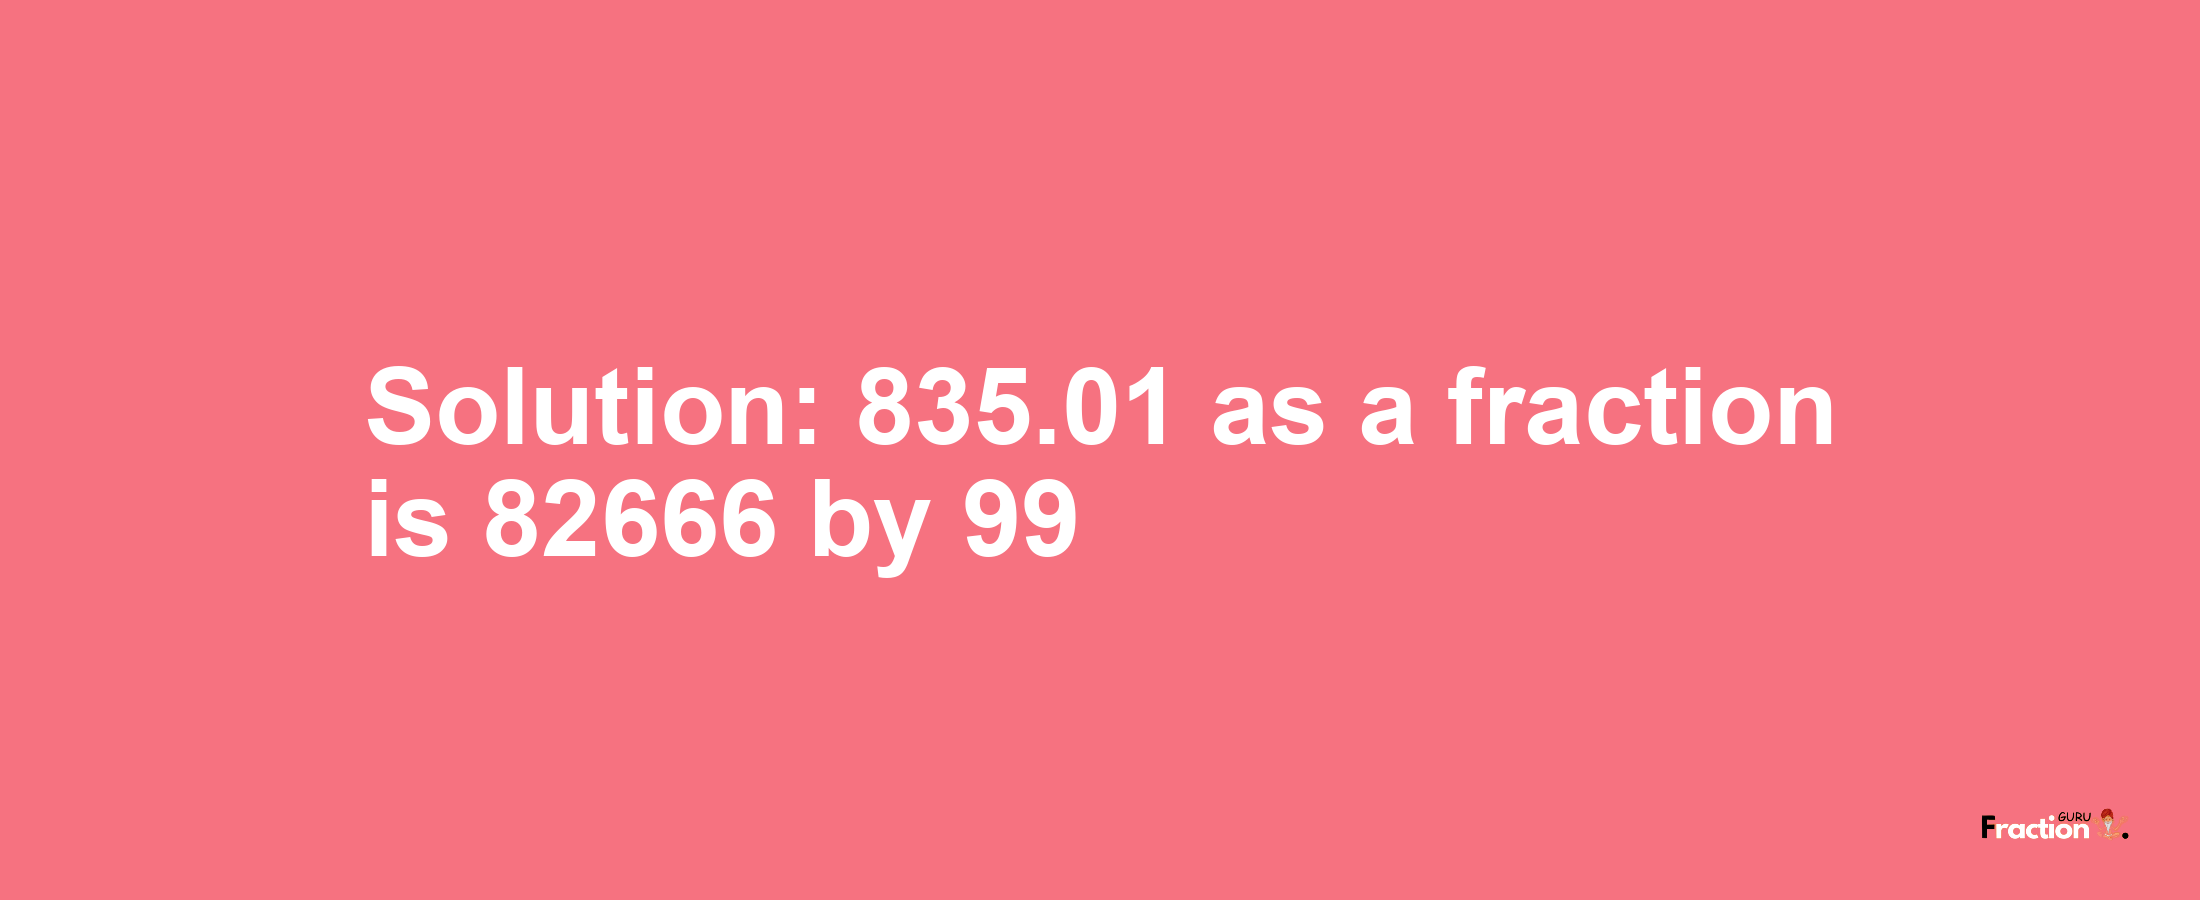 Solution:835.01 as a fraction is 82666/99